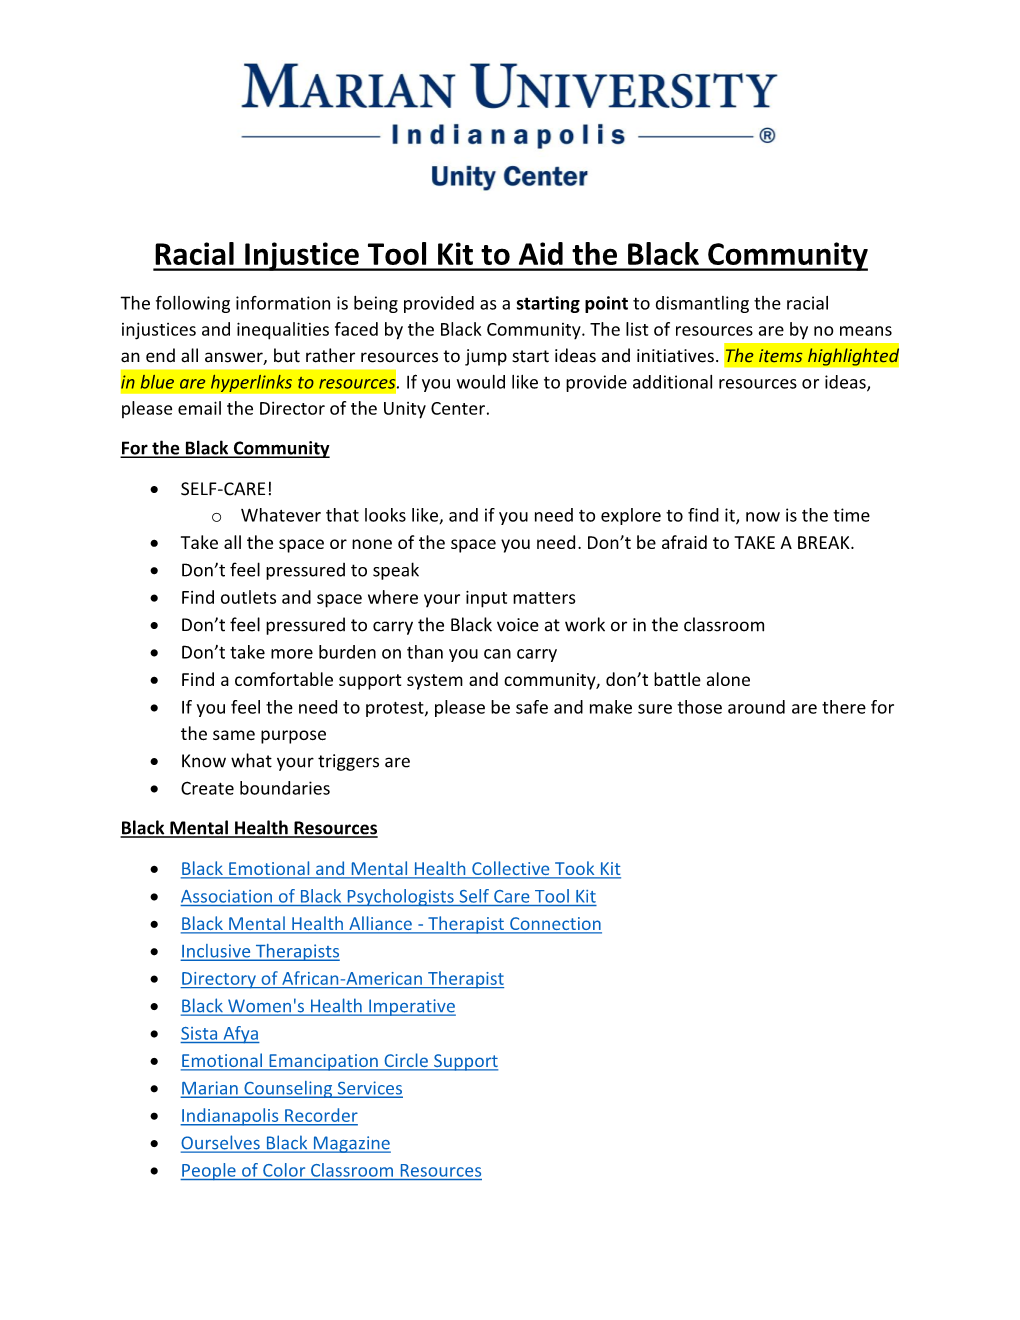 Racial Injustice Tool Kit to Aid the Black Community